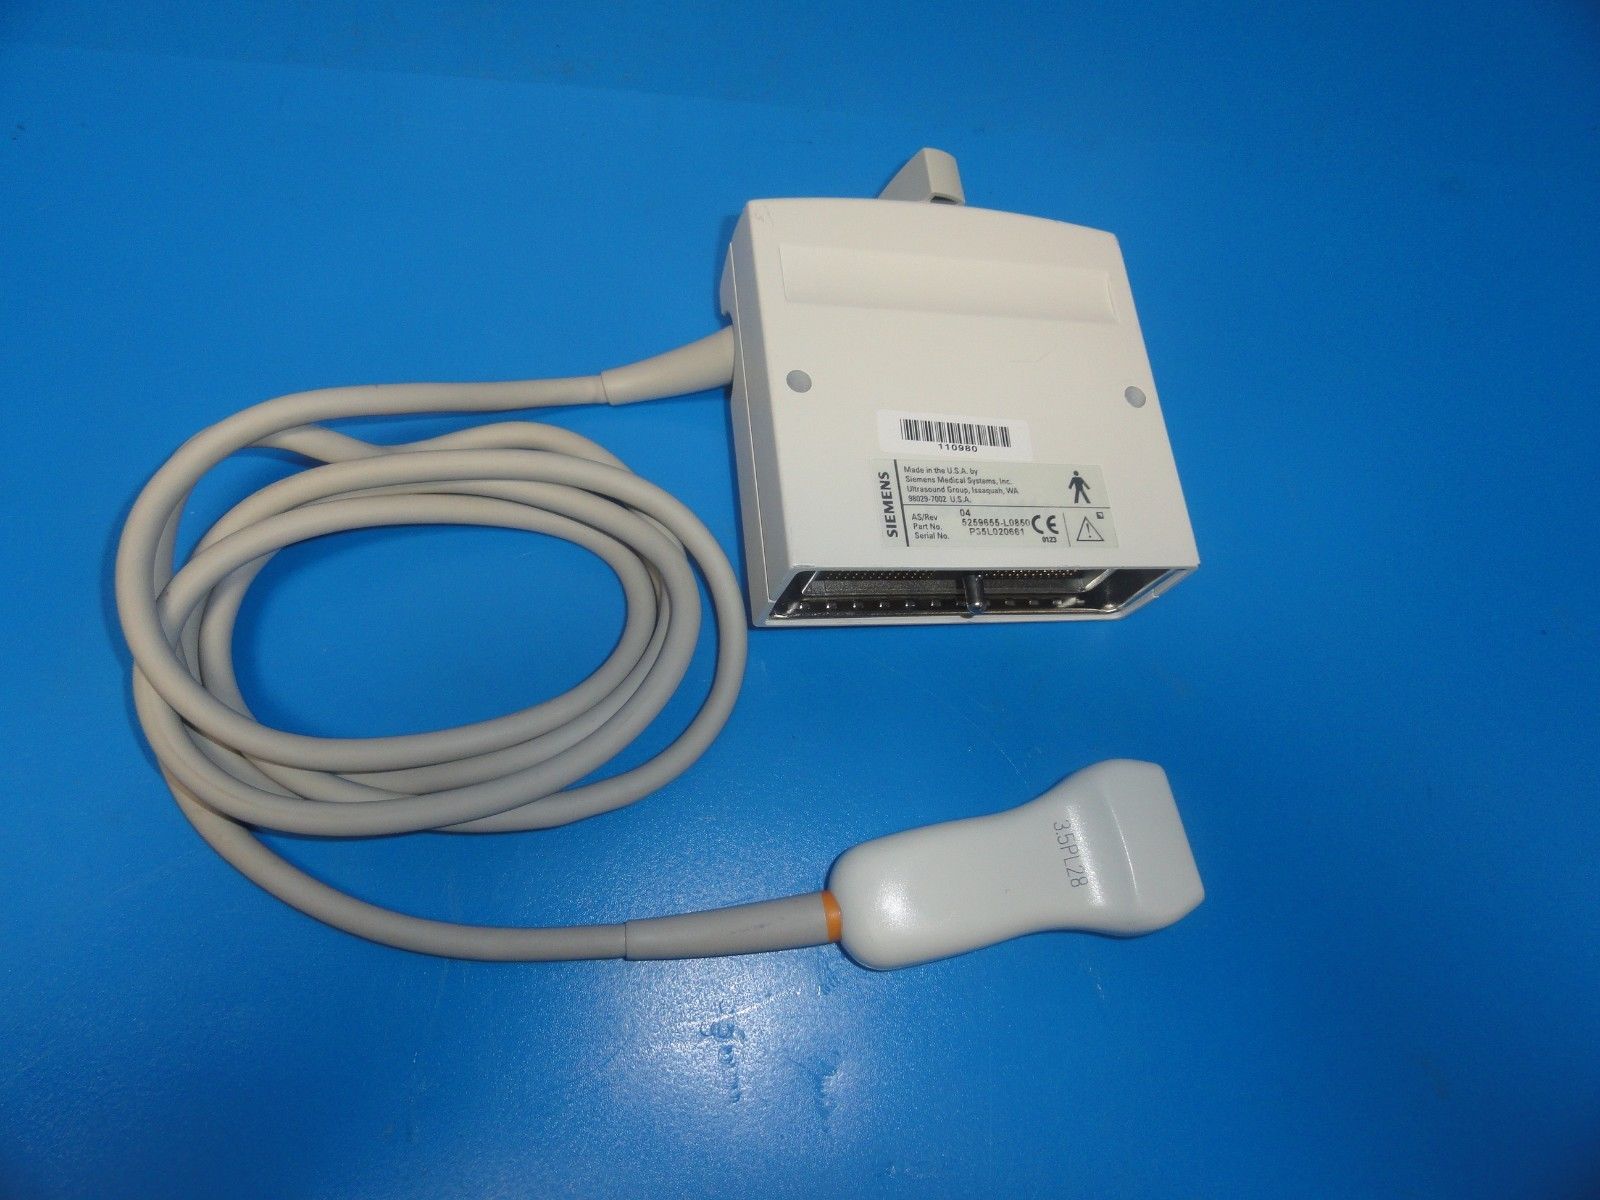 SIEMENS 3.5PL28 3.5 MHz Cardiac Sector phased Array Ultrasound Transducer (6082) DIAGNOSTIC ULTRASOUND MACHINES FOR SALE